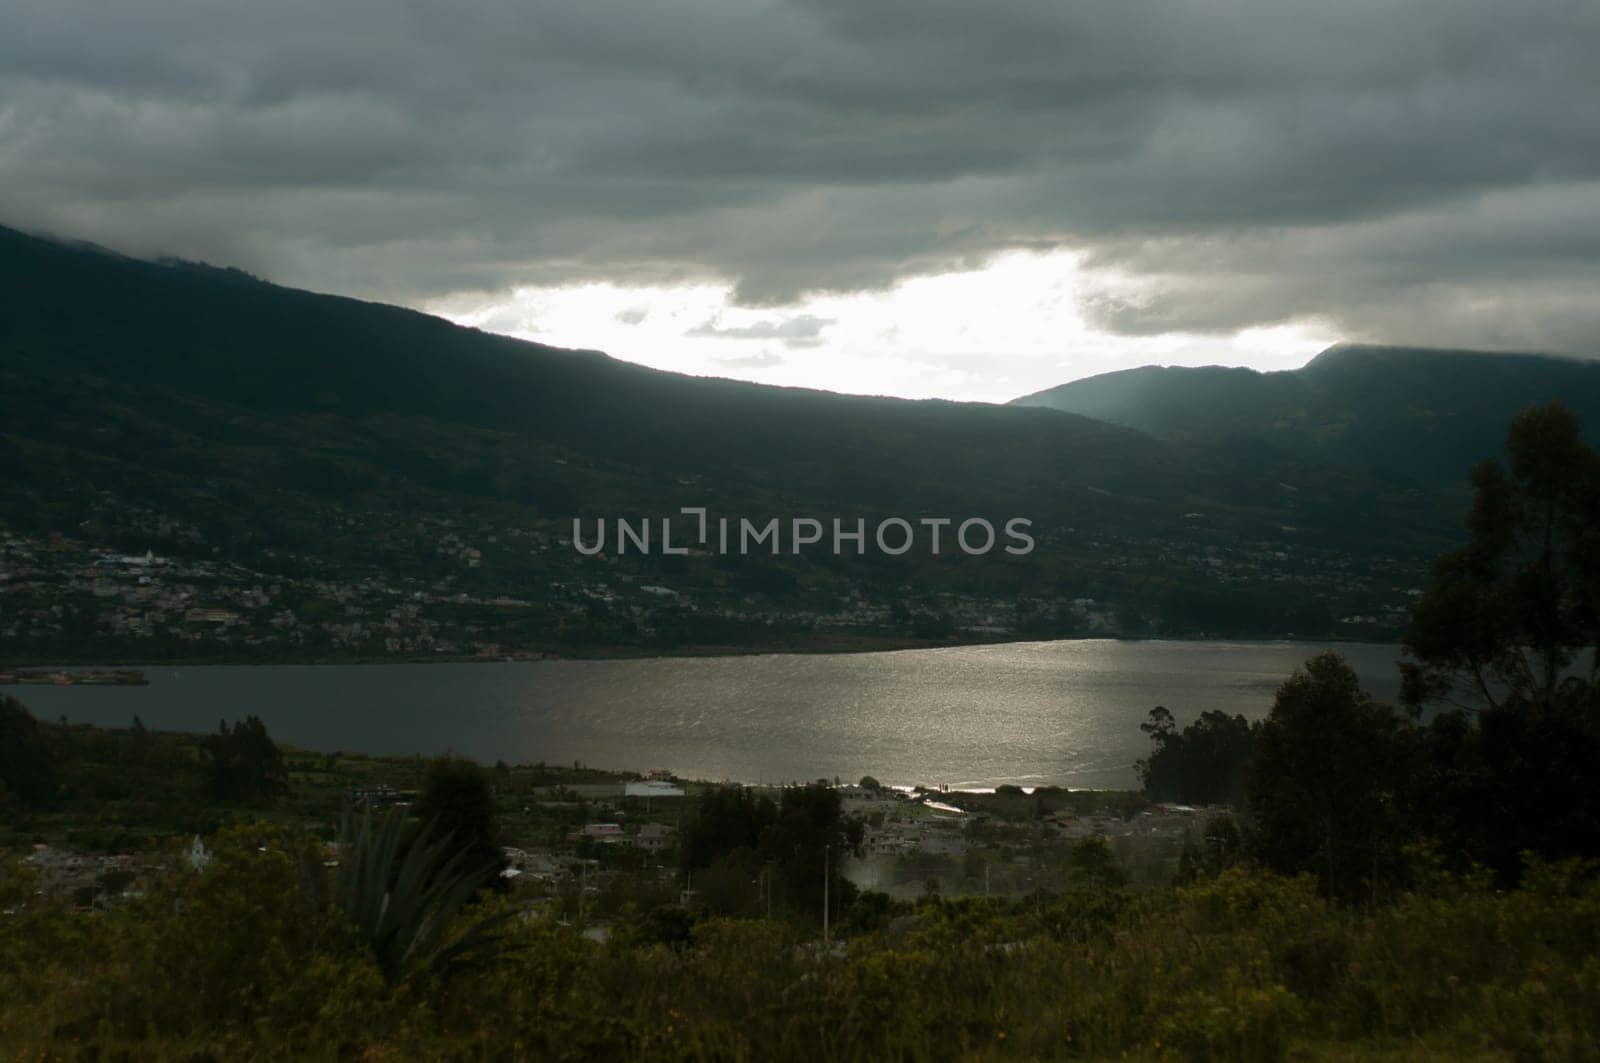 This photo captures the stunning sight of Lake San Pablo with the majestic Andes Mountains in the background in Ecuador.